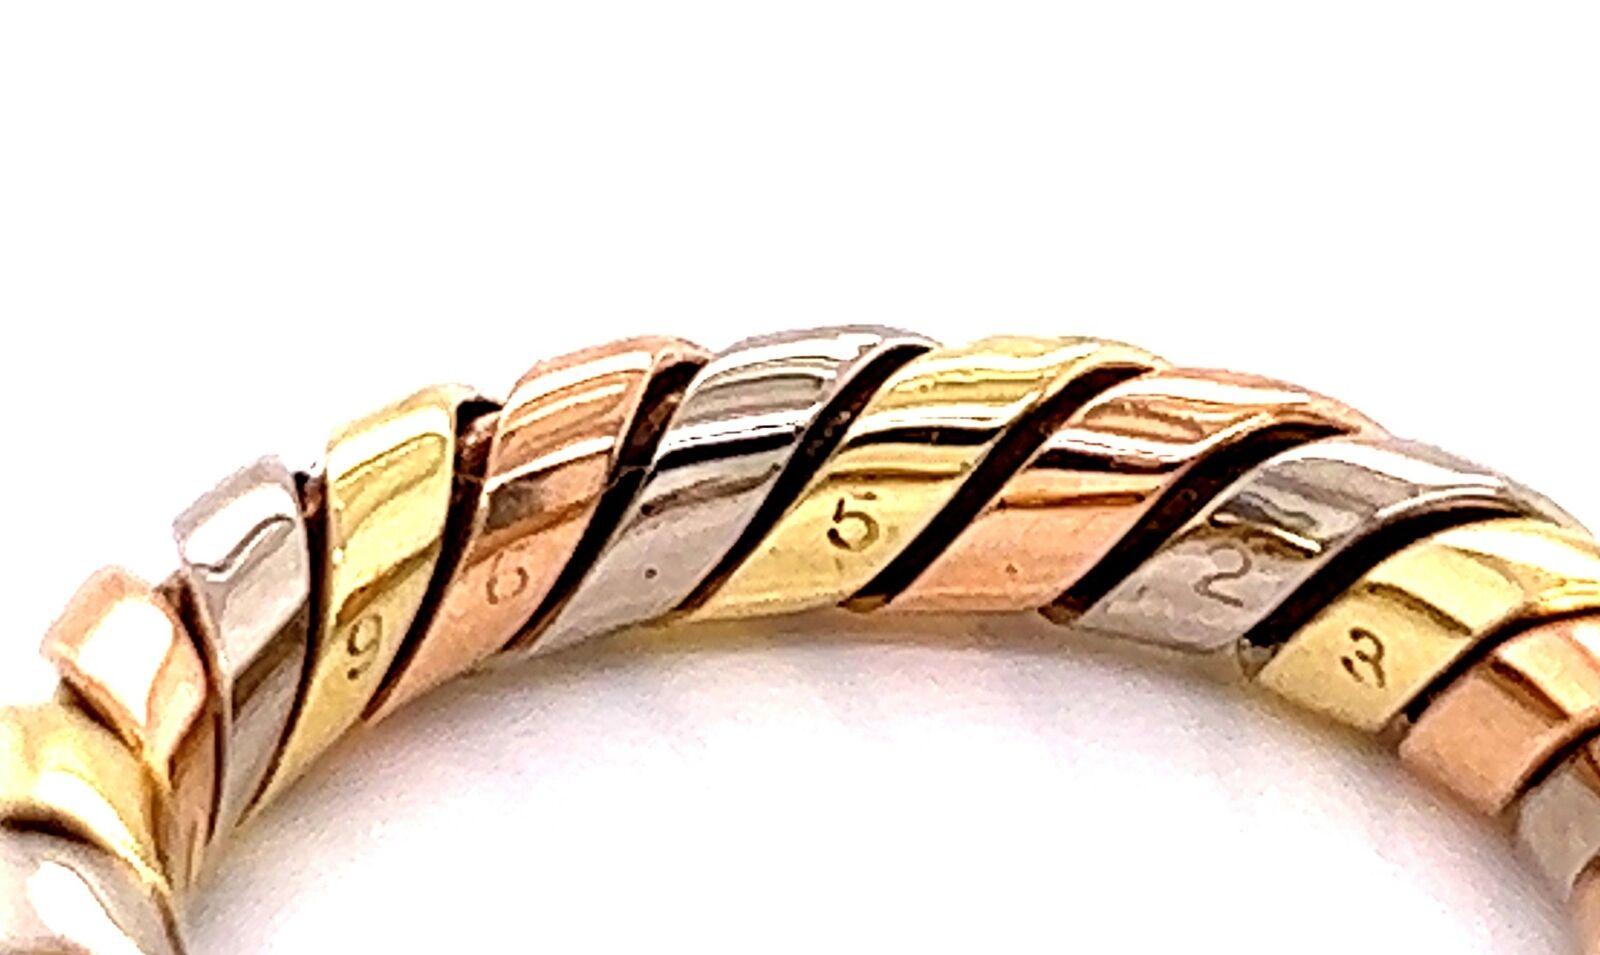 Bvlgari Tubogas 18k Tri Color Gold Band Ring In Excellent Condition For Sale In Boca Raton, FL